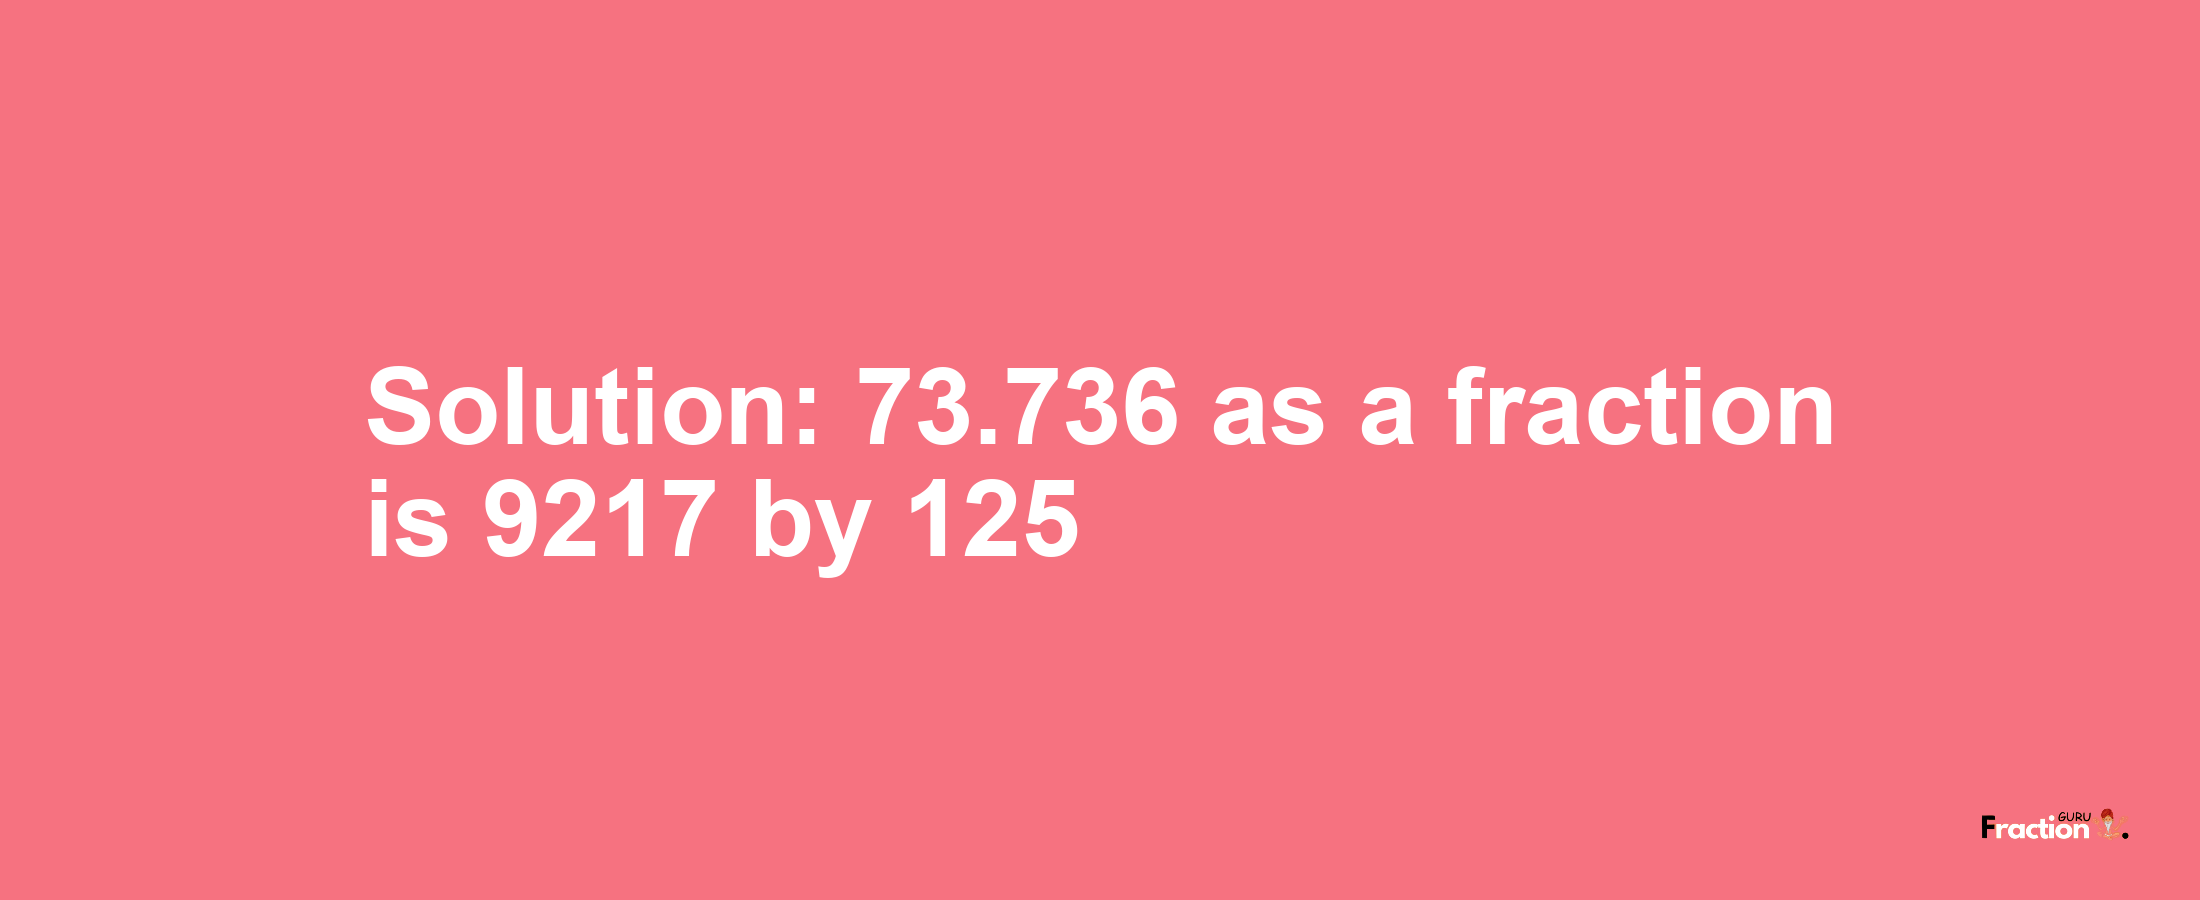 Solution:73.736 as a fraction is 9217/125